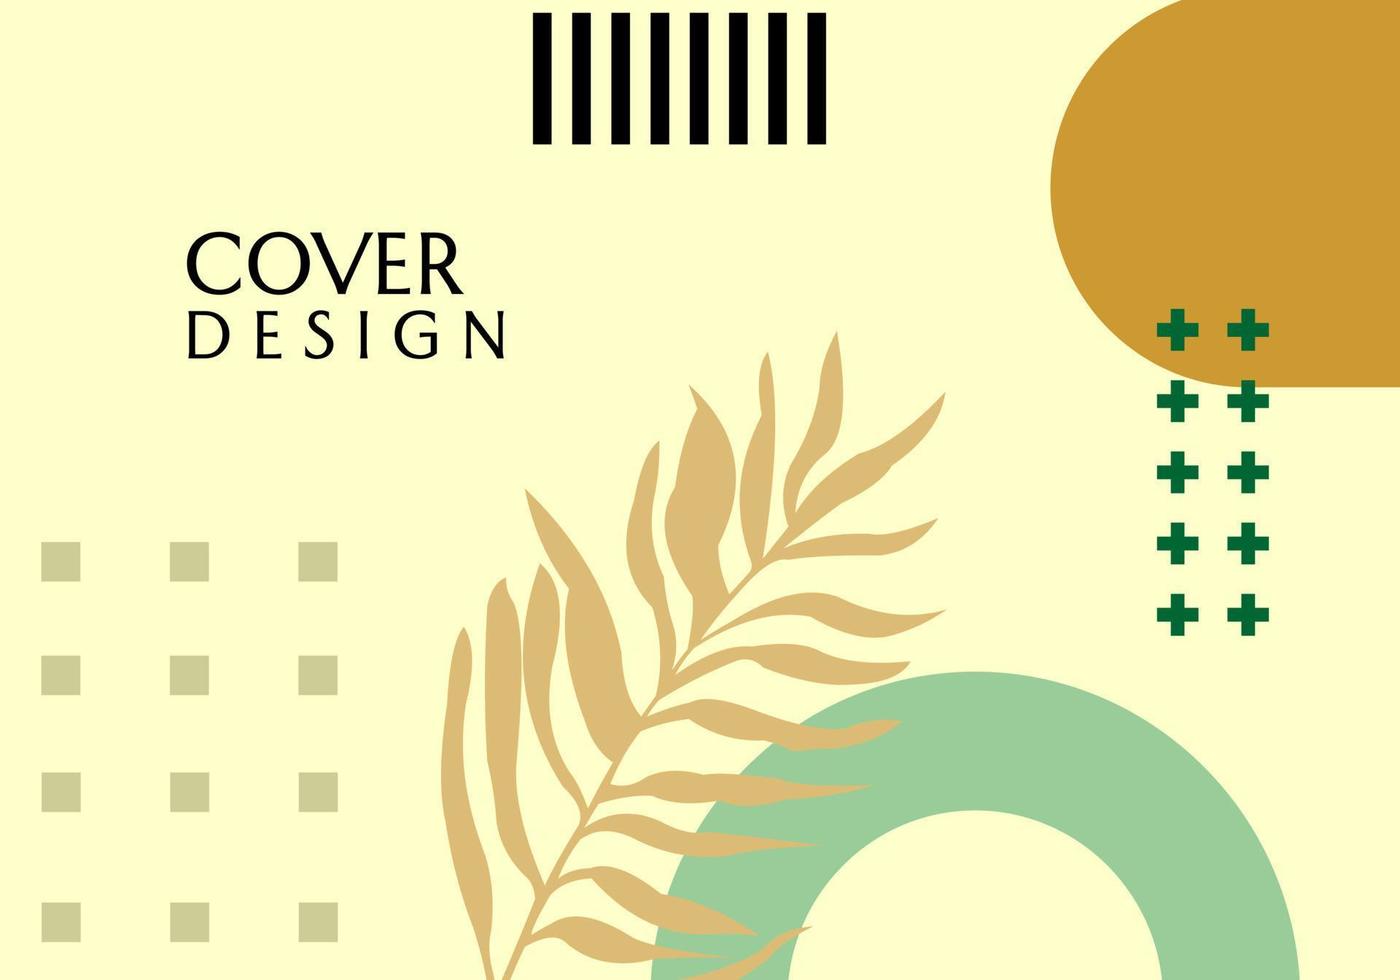 geometry vector design. brown aesthetic background with palm leaf ornaments. for cover design, website, banner